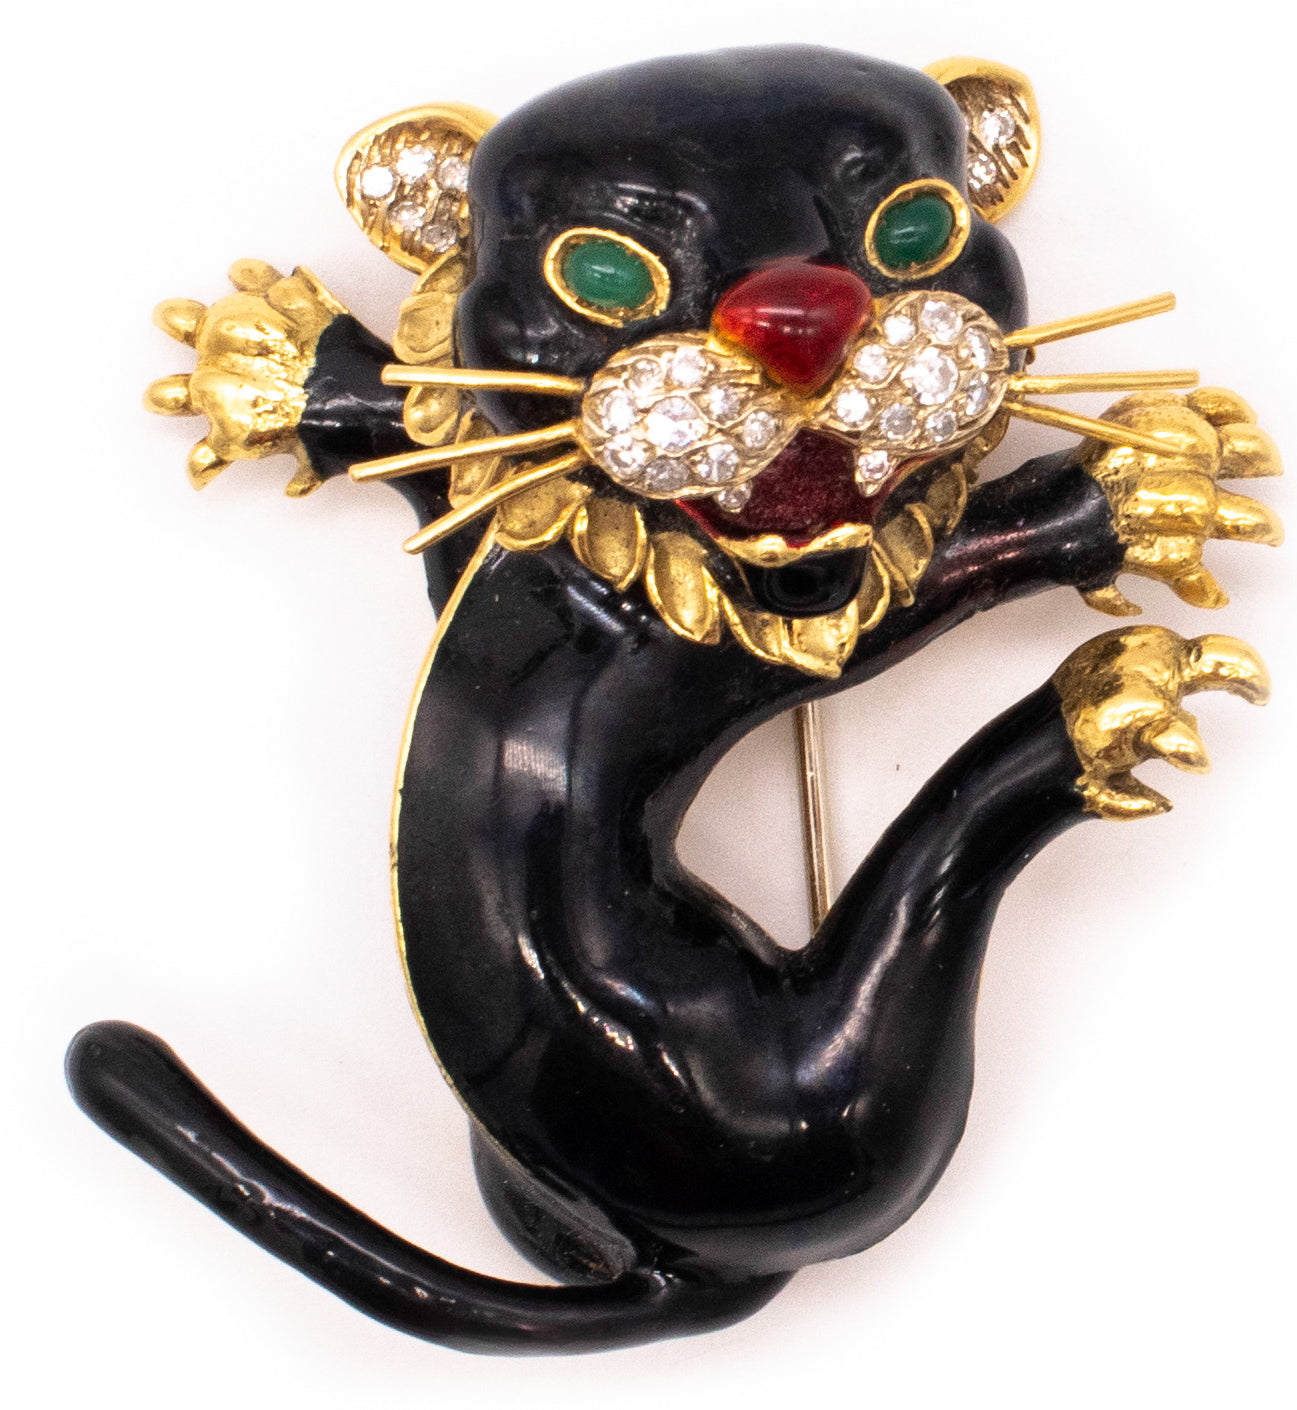 Frascarolo 1960 Italy 18Kt Gold Black Panther Brooch With Enamel 1.35 Ctw In Diamonds And Emeralds